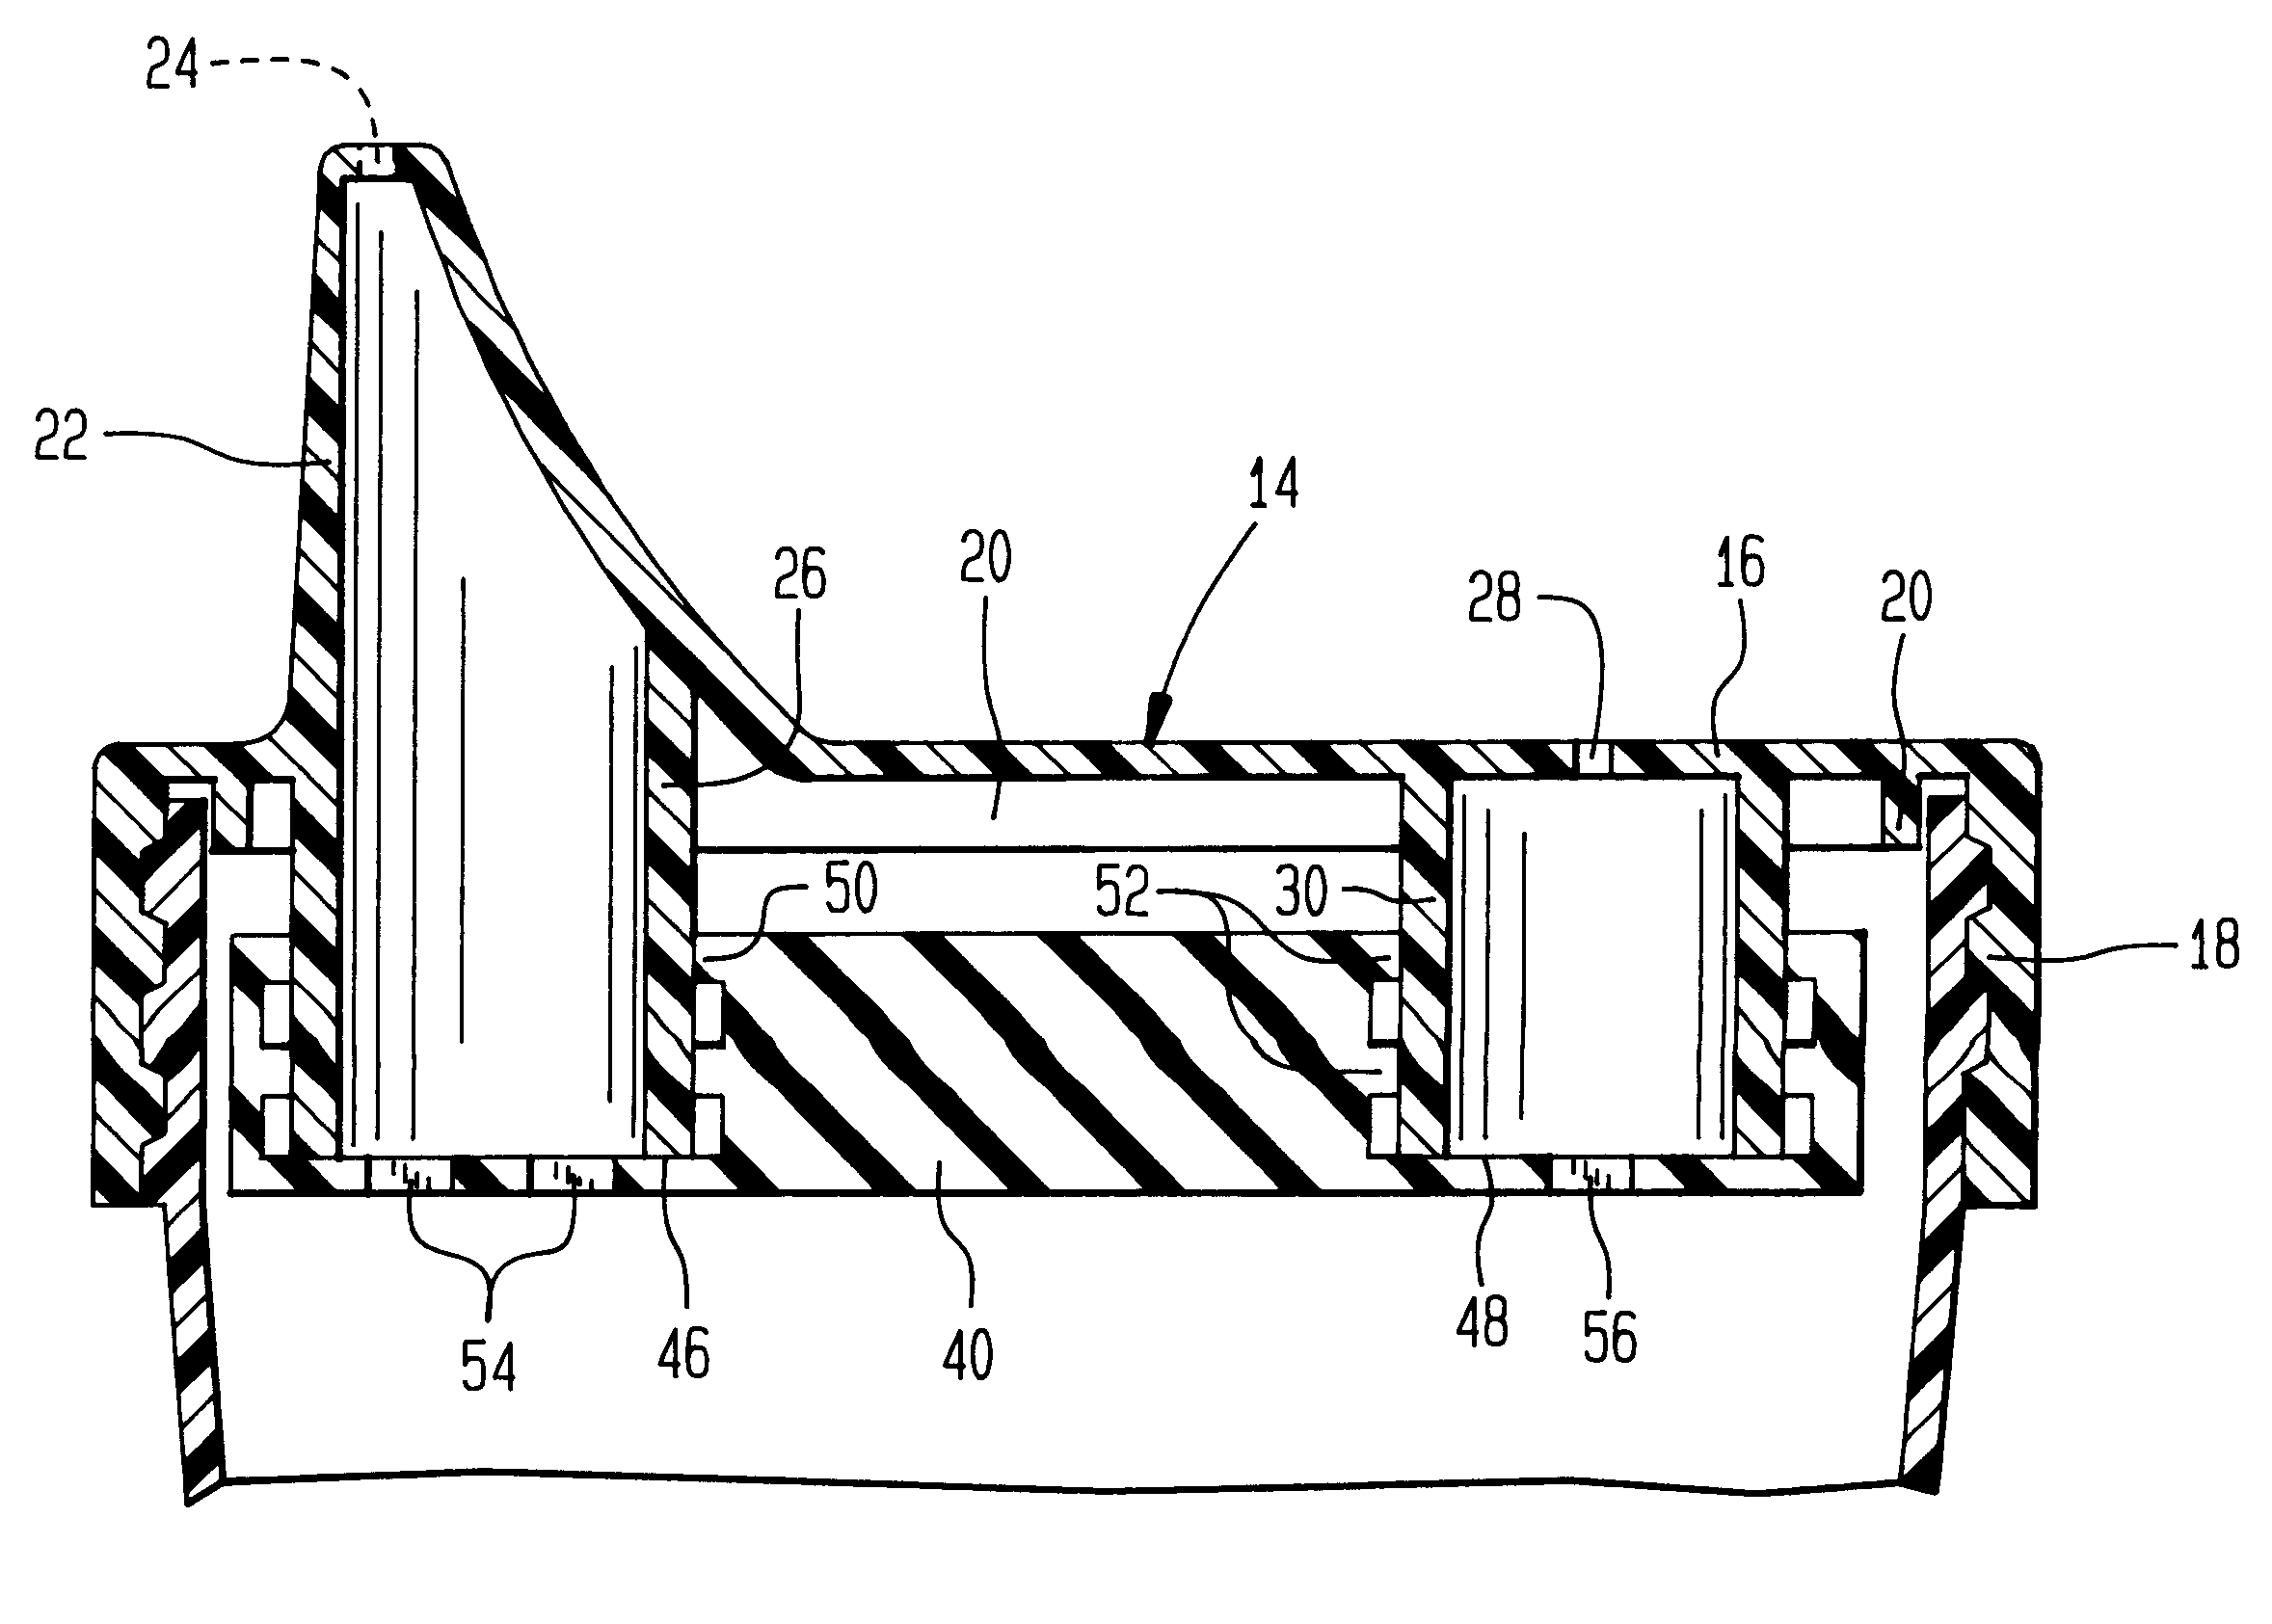 Flow control element and covered drinking cup